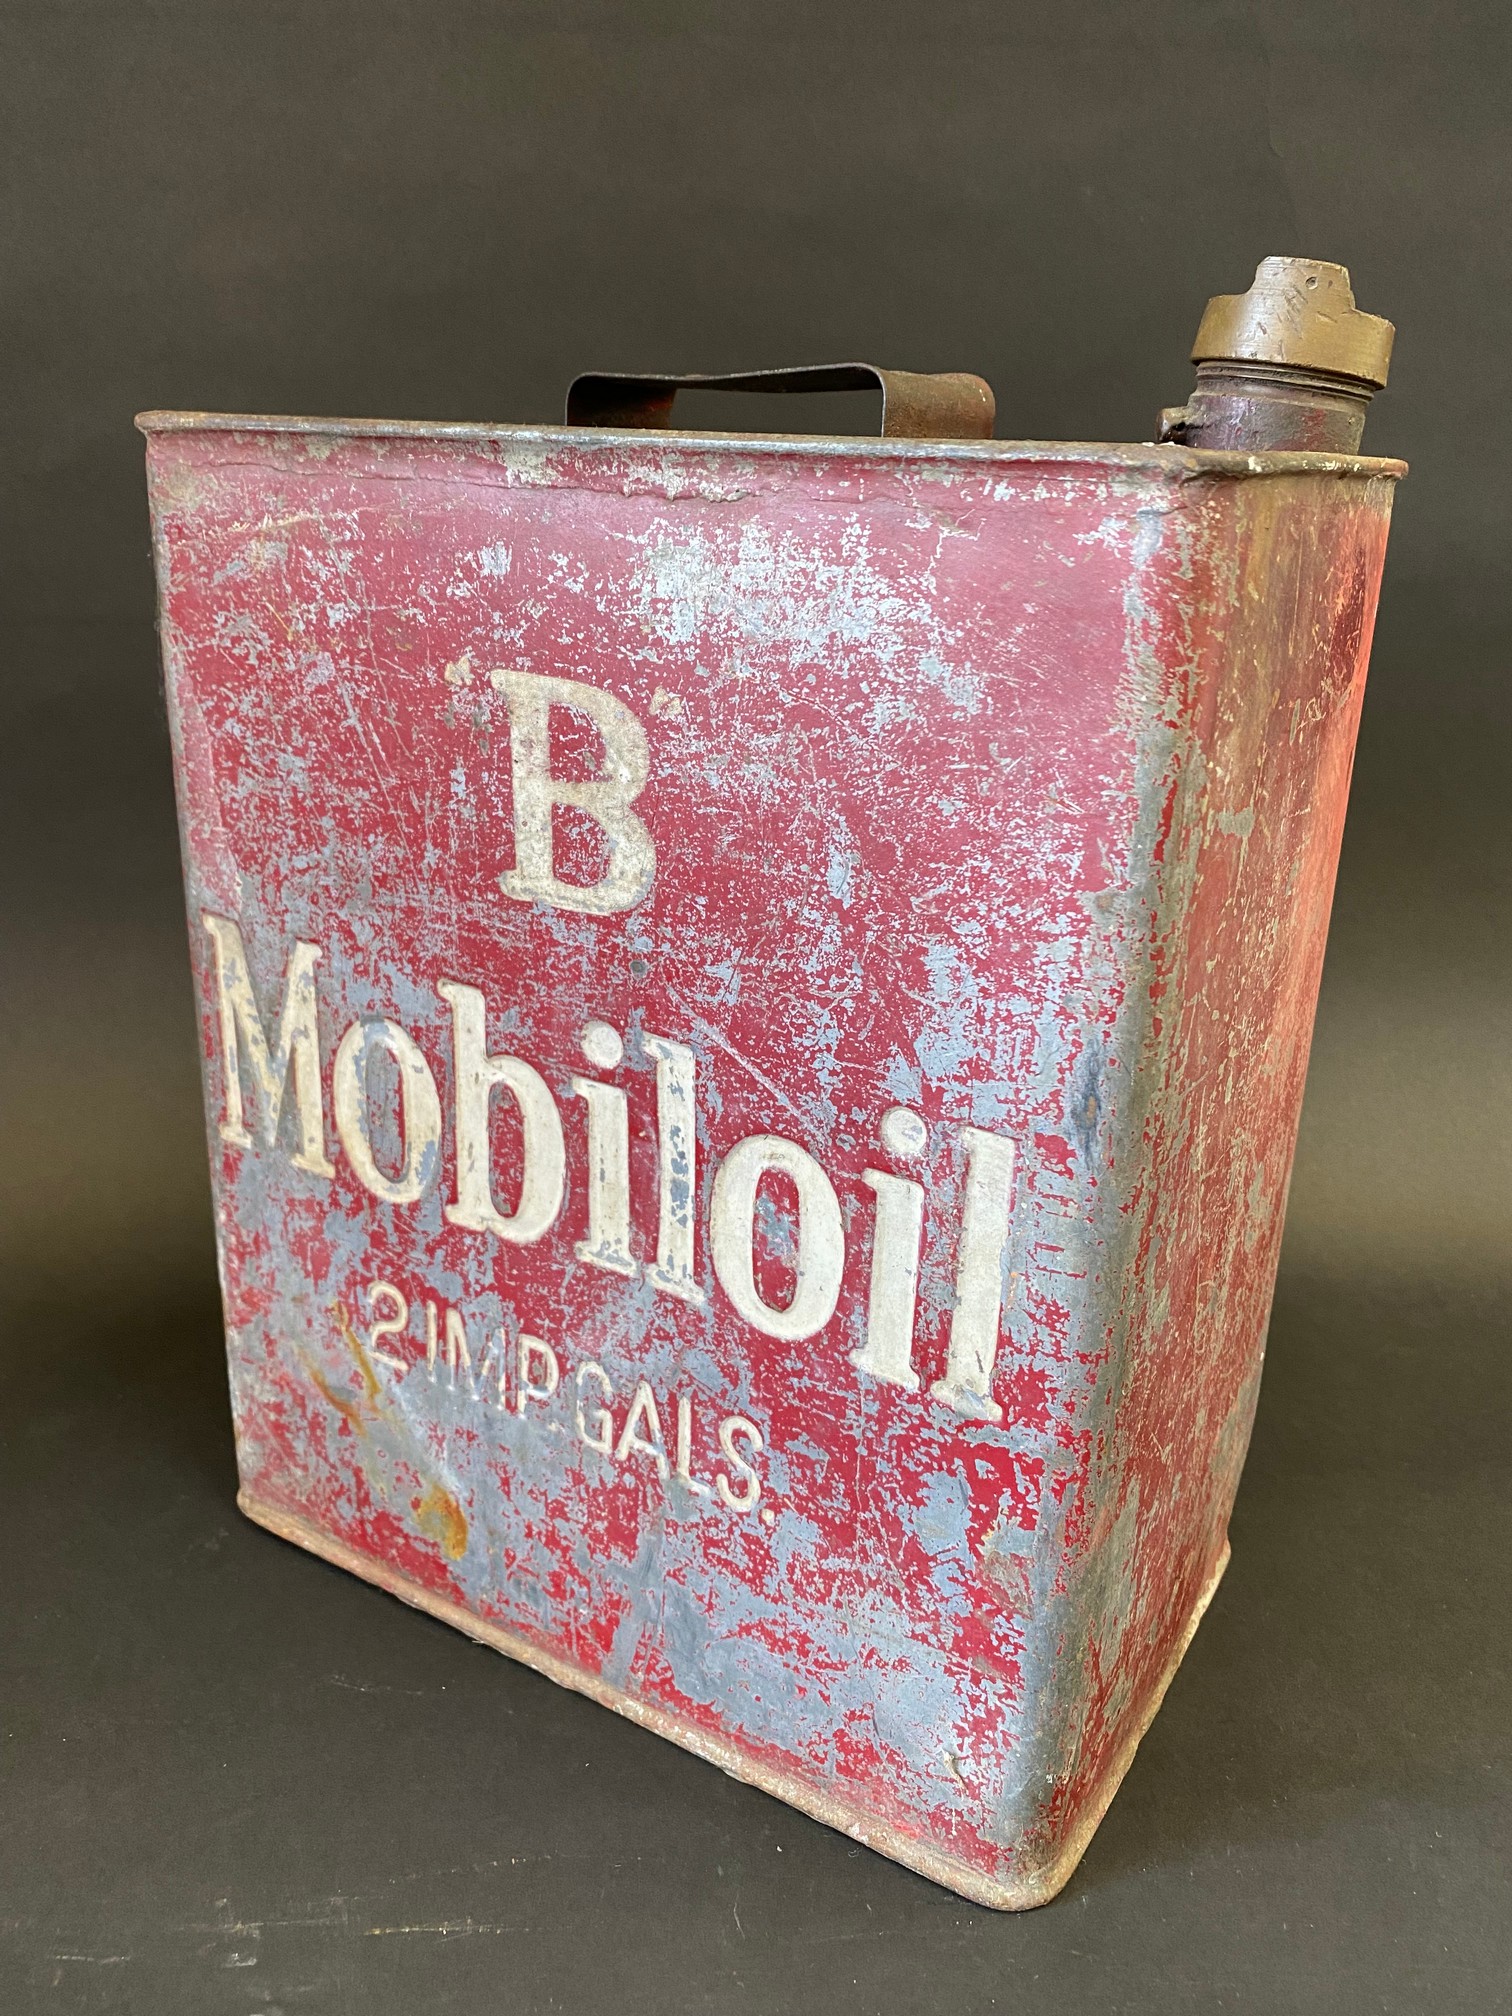 A Mobiloil 'B' grade two Imperial gallon petrol can in original paint.